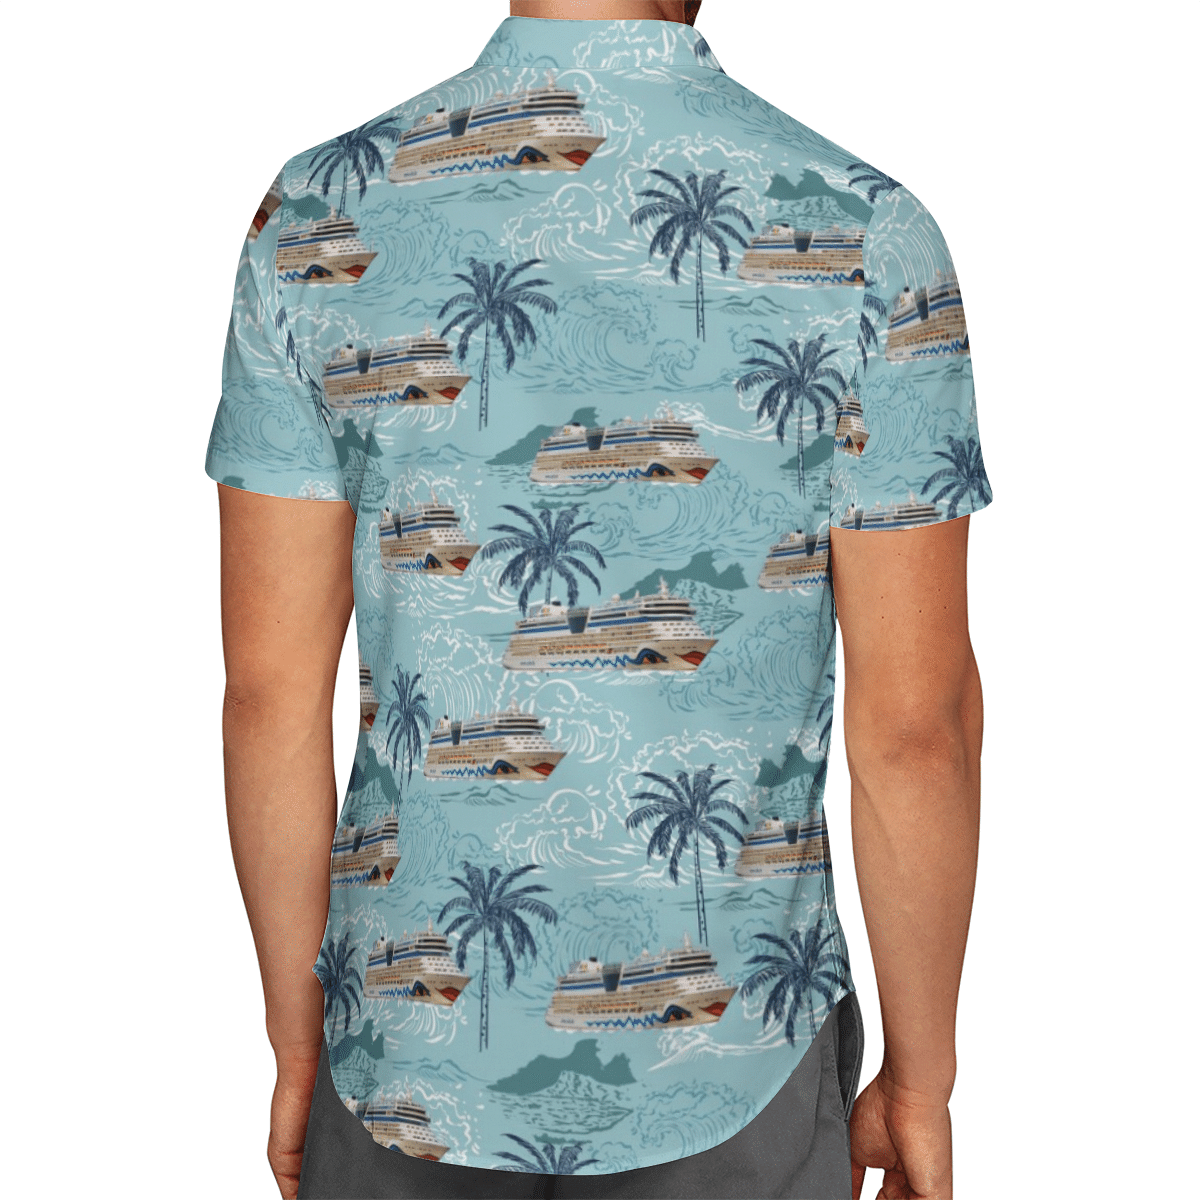 Going to the beach with a quality shirt 132